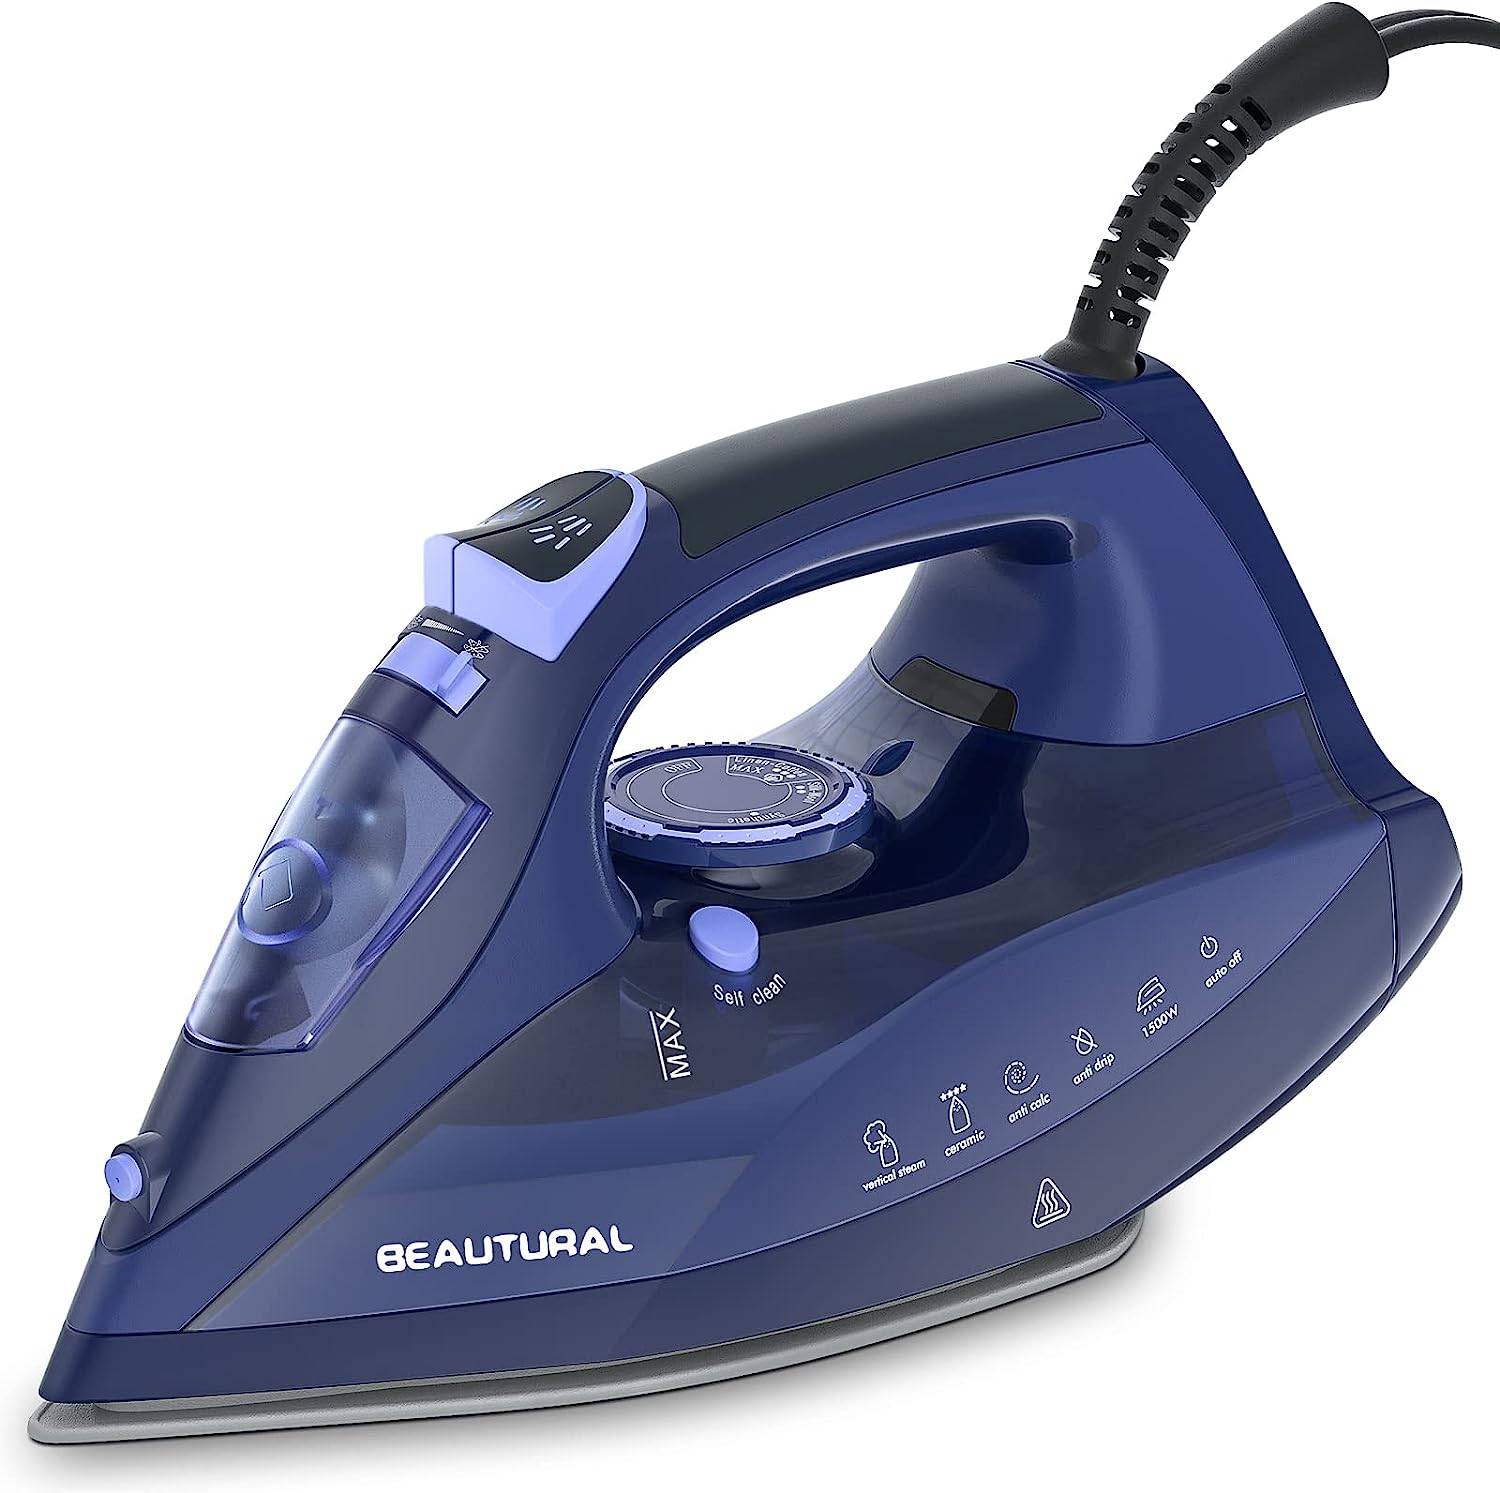 Utopia Home Steam Iron for Clothes With Non-Stick Soleplate - 1200W Clothes  Iron With Adjustable Thermostat Control, Overheat Safety Protection 